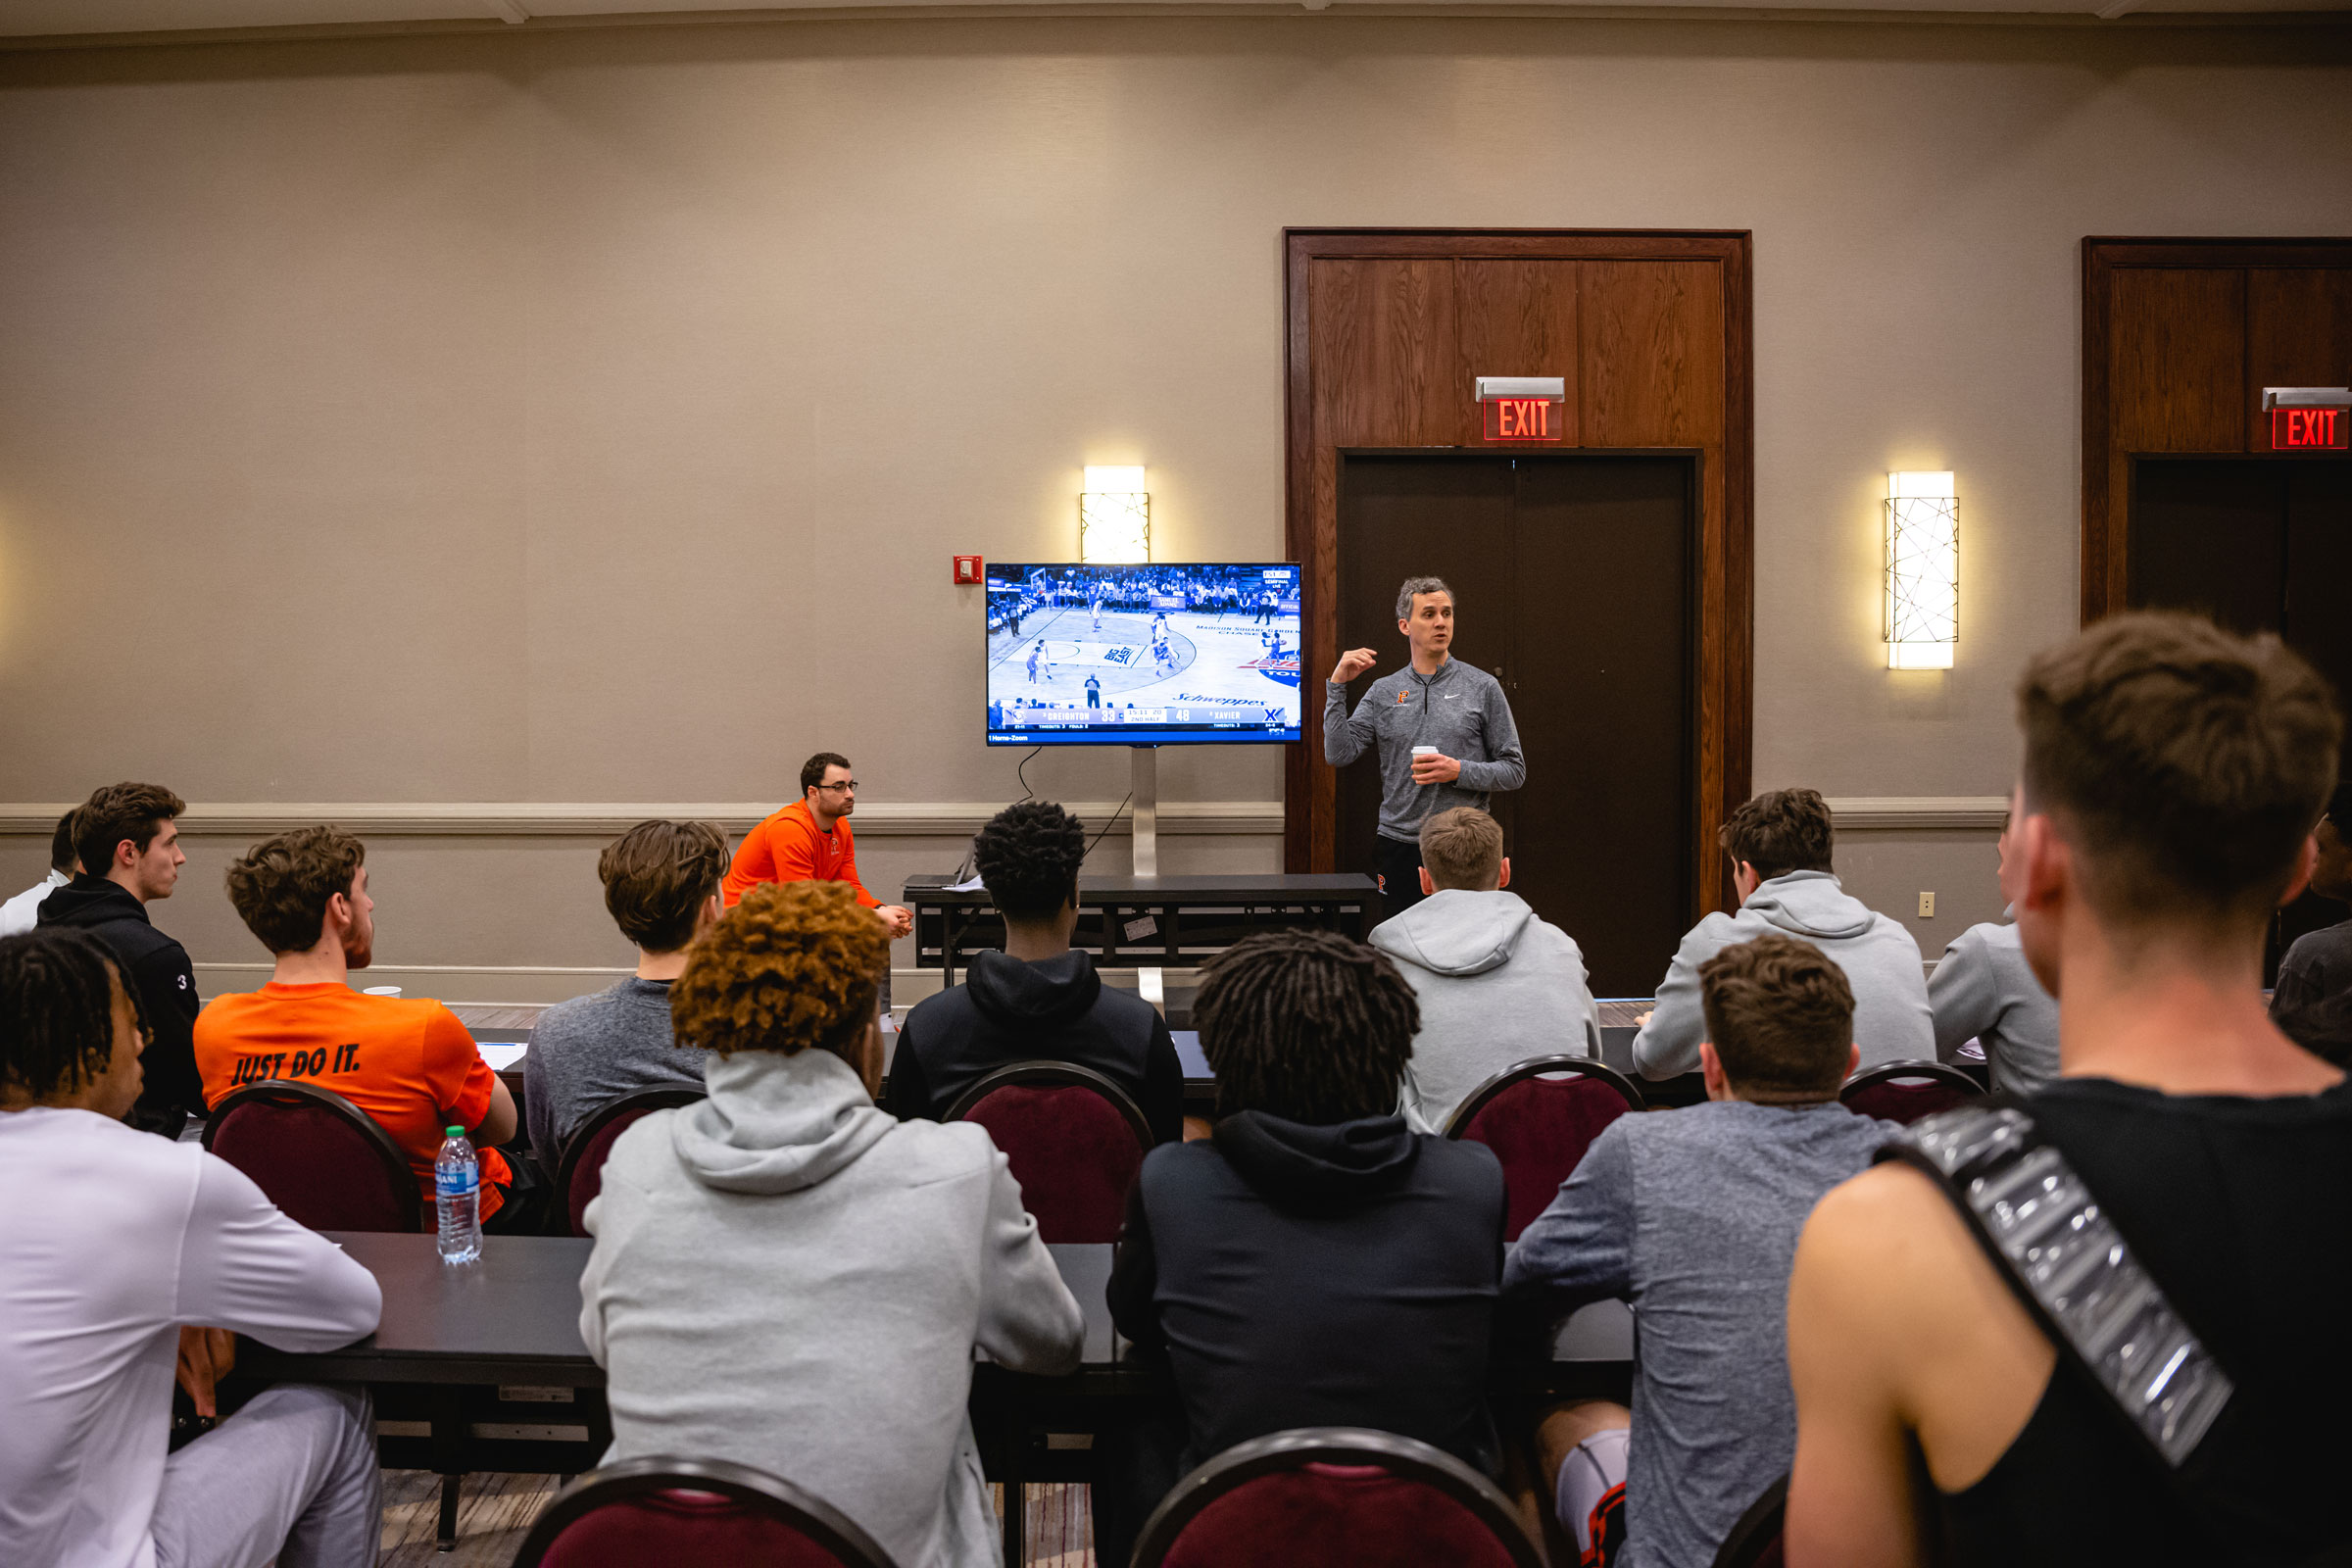 Coach Mitch Henderson reviews play footage during a team meeting at Hyatt Regency Hotel in Louisville, Kentucky on March 23, 2023.